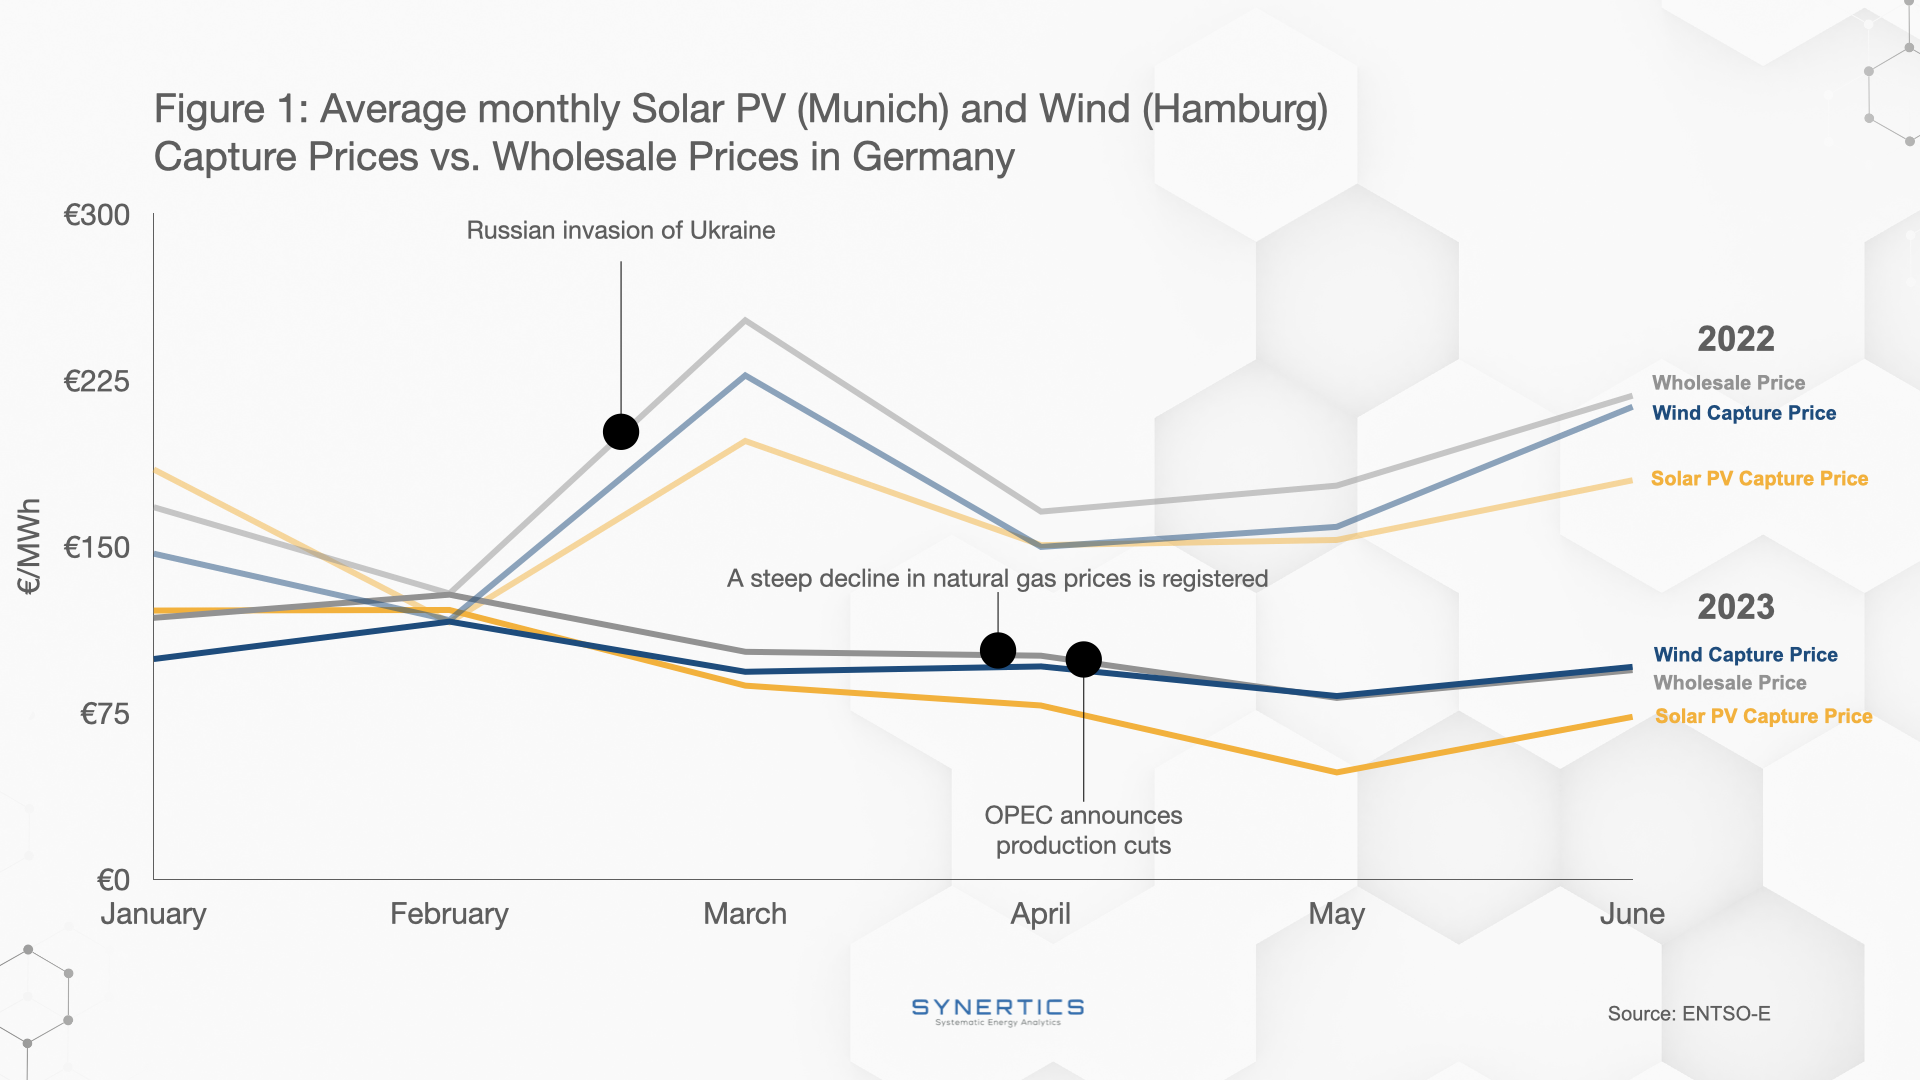 Average monthly Solar PV and Wind Capture and Wholesale Prices in Germany